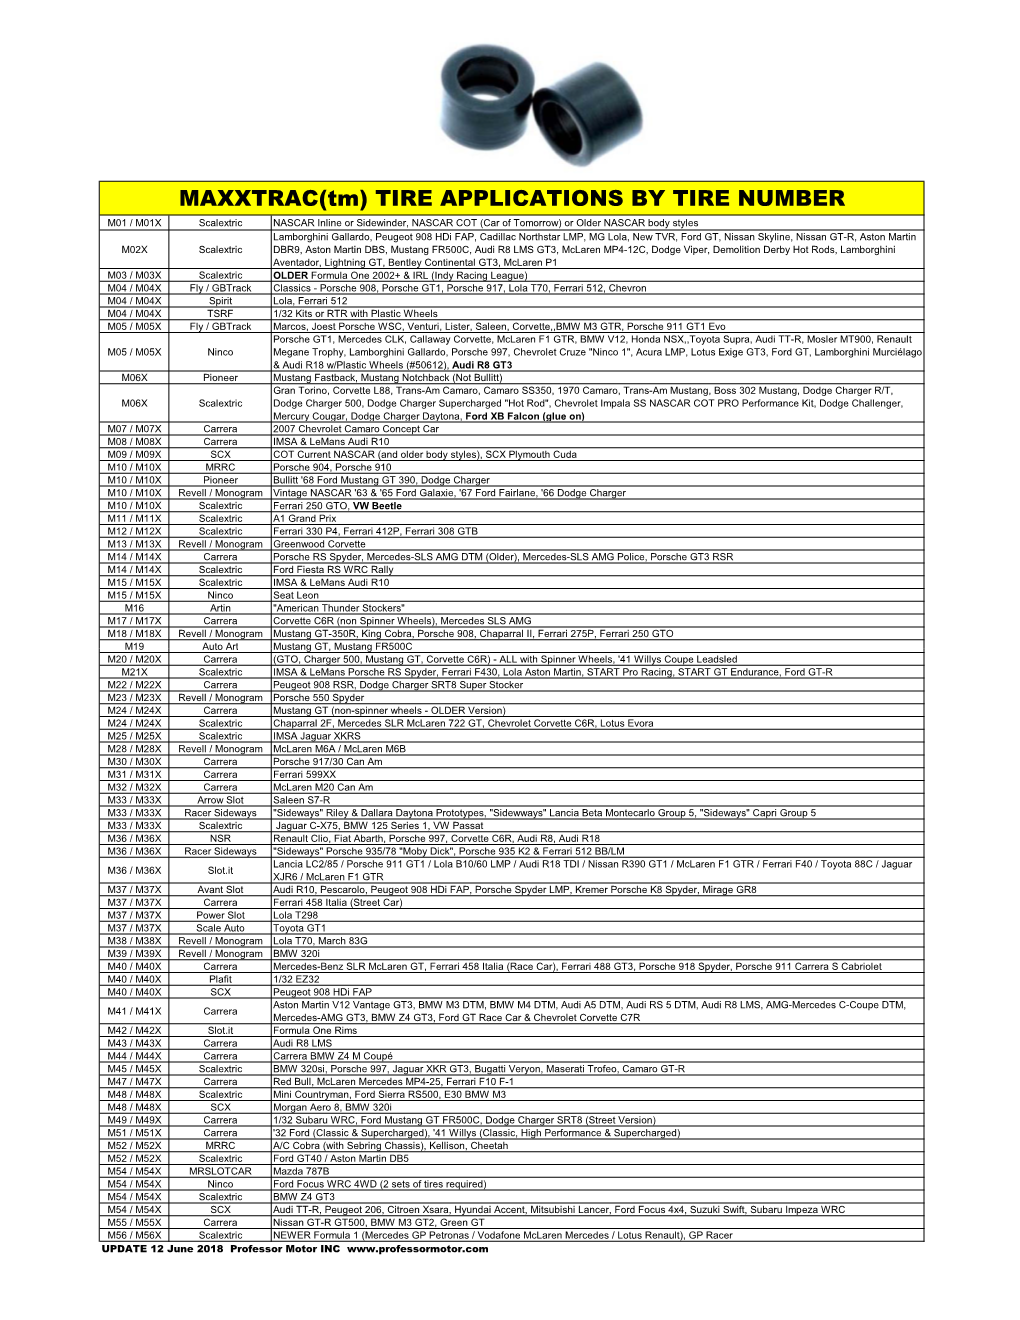 MAXXTRAC(Tm) TIRE APPLICATIONS by TIRE NUMBER